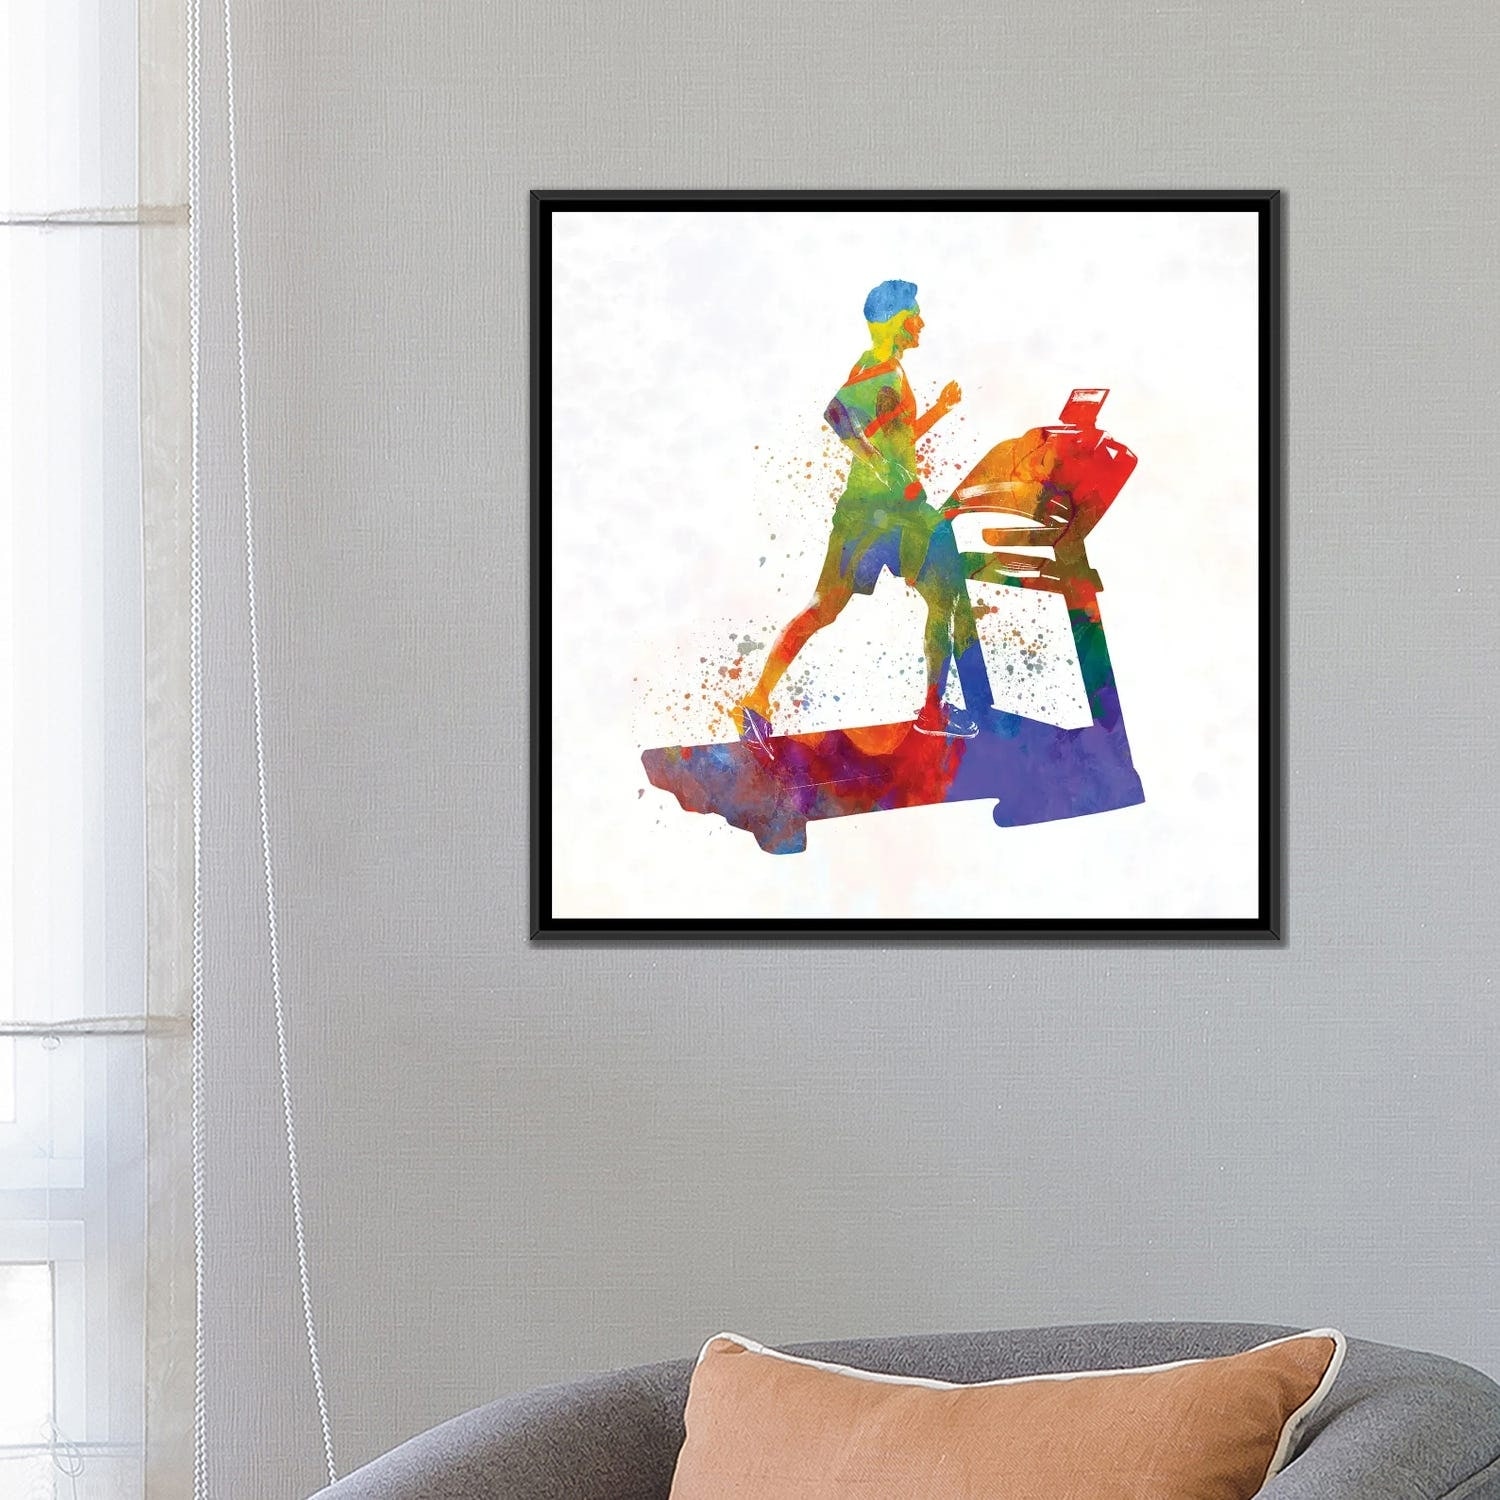 Luxury In The 21st Century I Canvas Art by Paul Rommer